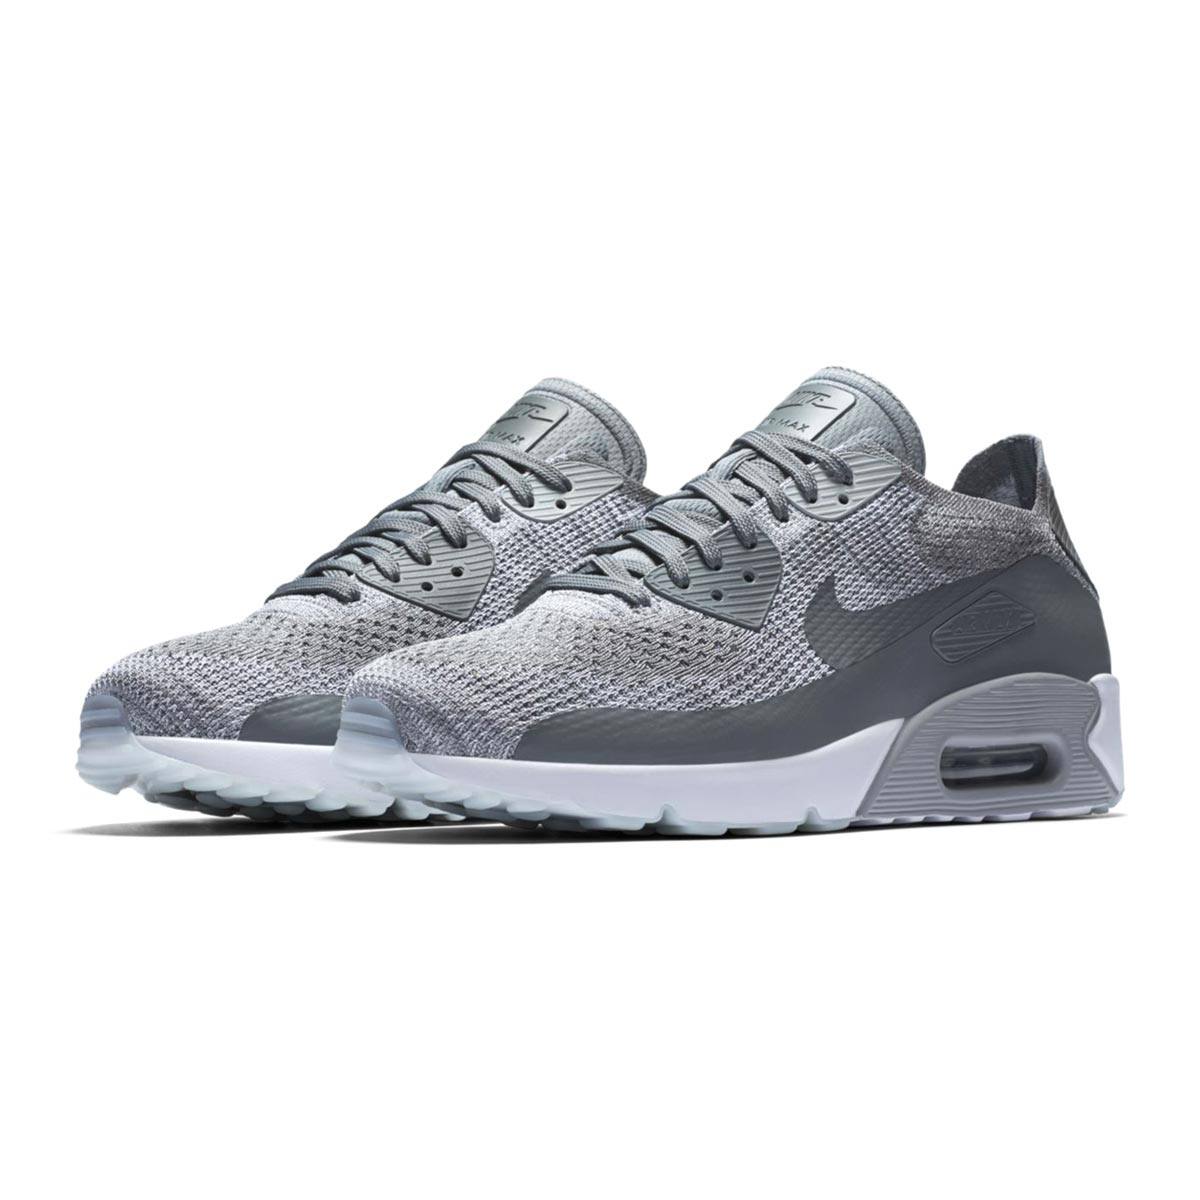 NIKE AIR MAX 90 ULTRA 2.0 FLYKNIT PURE 